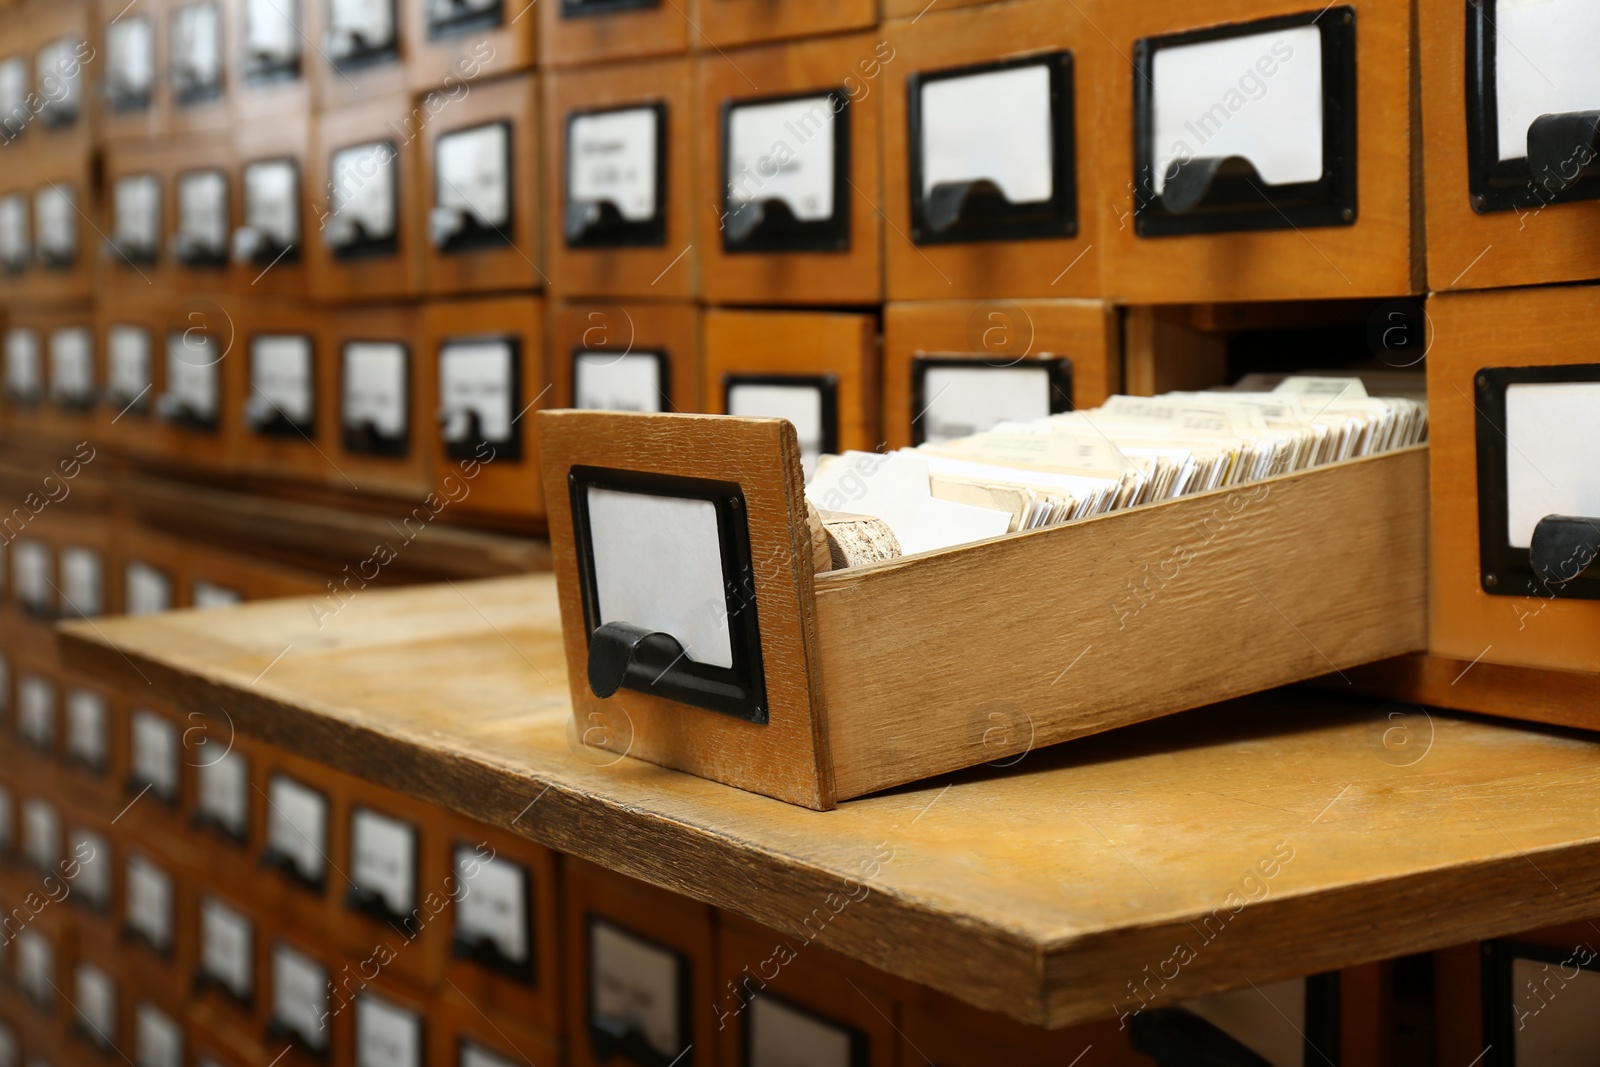 Photo of Closeup view of library card catalog drawers